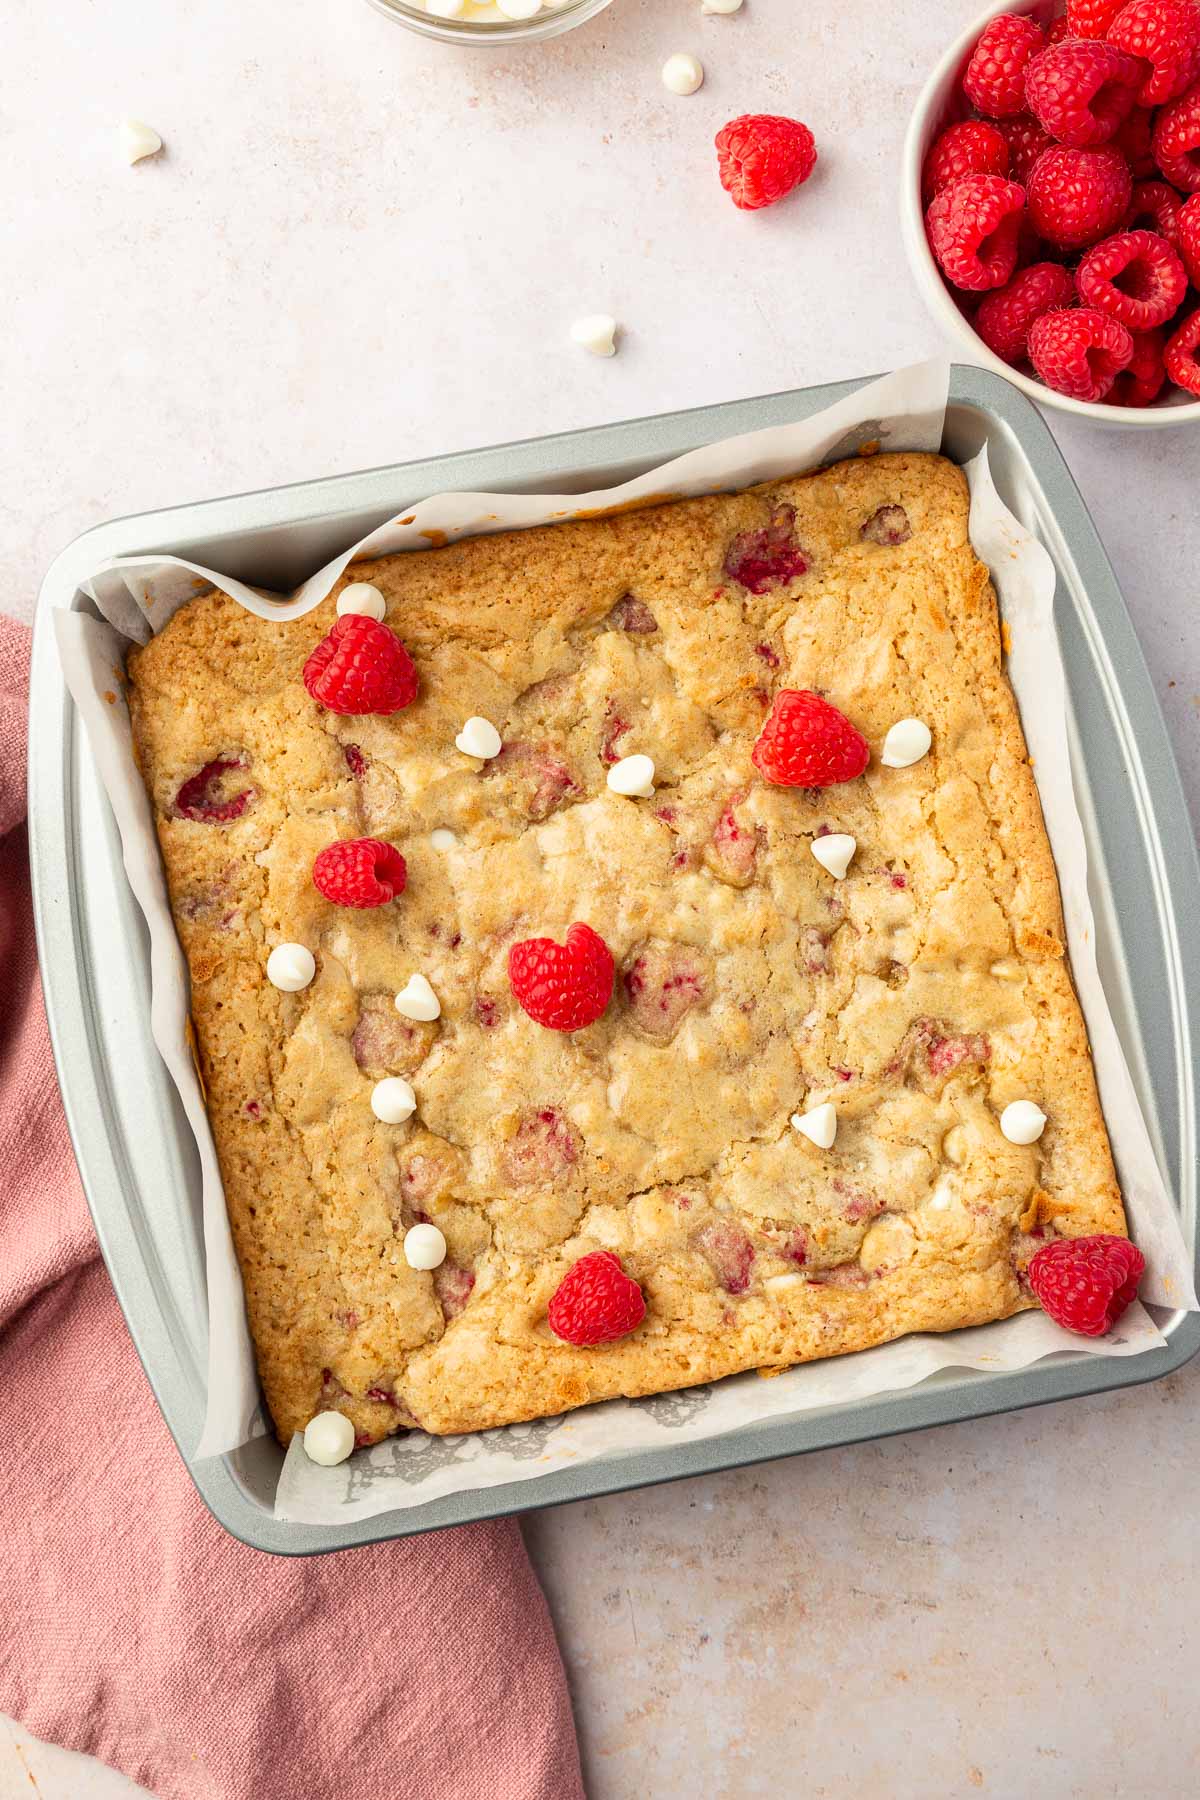 A square metal baking pan filled with gluten free raspberry white chocolate blondies that have been baked in the oven with a bowl of raspberries to the side.